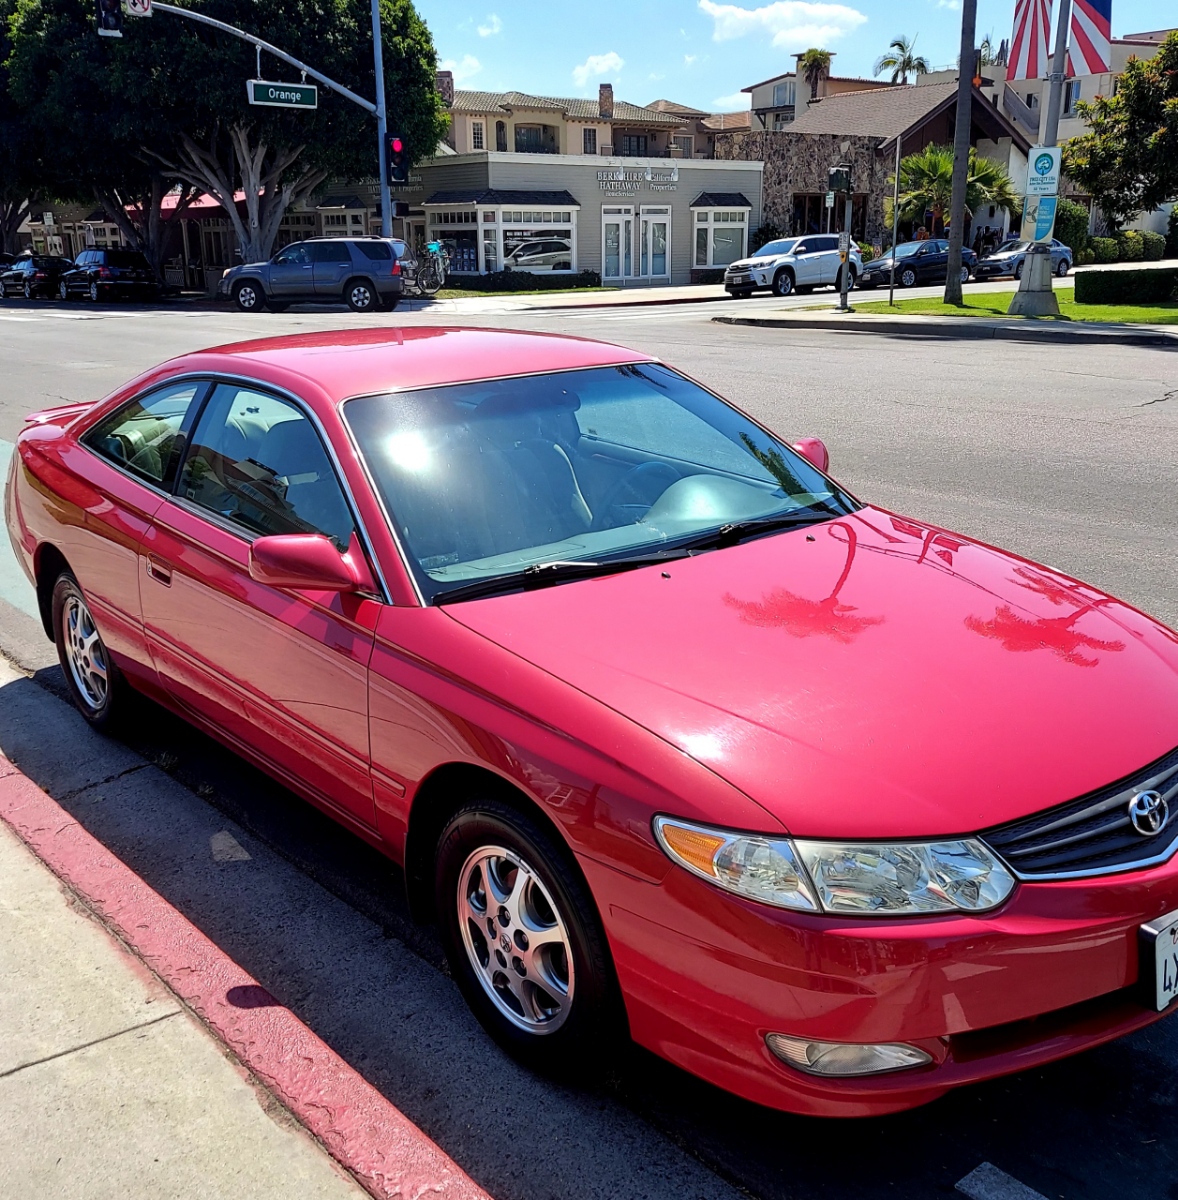 Used 2002 Toyota Camry Solara for Sale in Los Angeles, CA | Cars.com